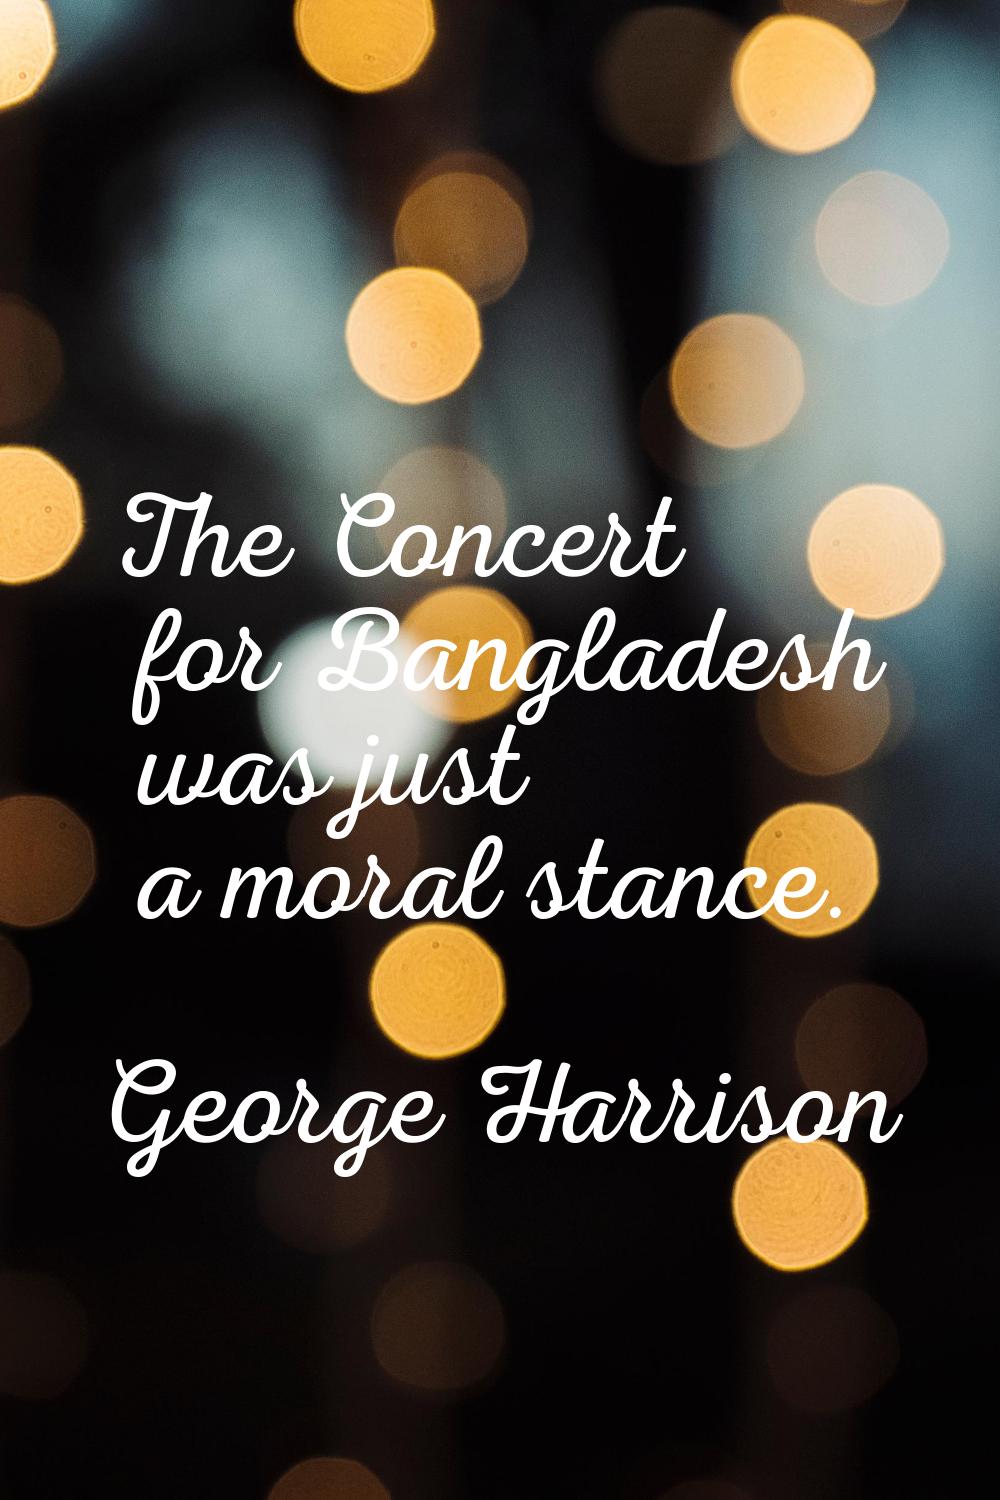 The Concert for Bangladesh was just a moral stance.